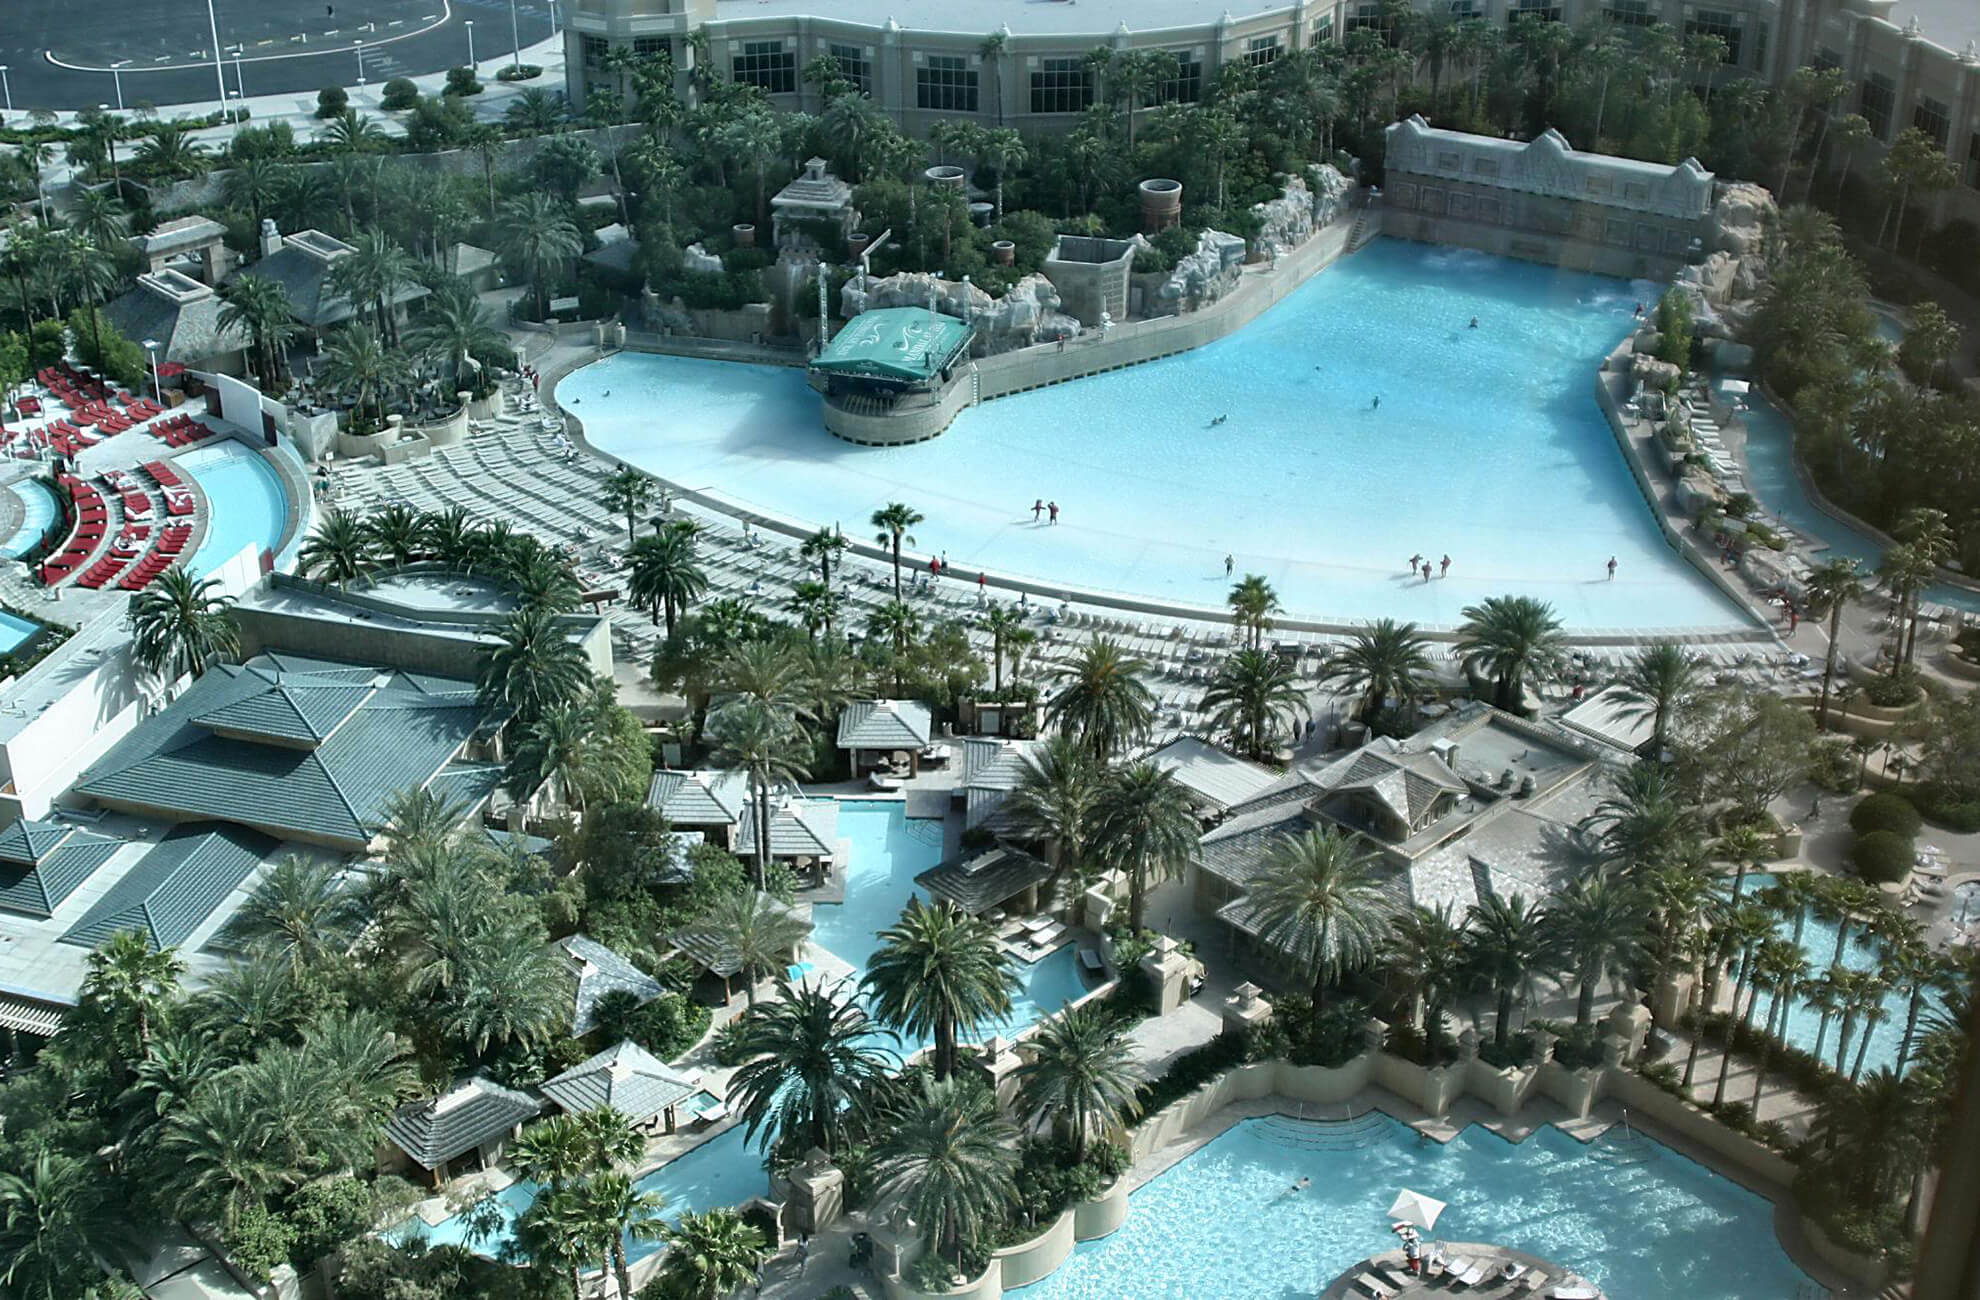 Mandalay Bay Resort on X: Relax. Unwind. Get in that pool day